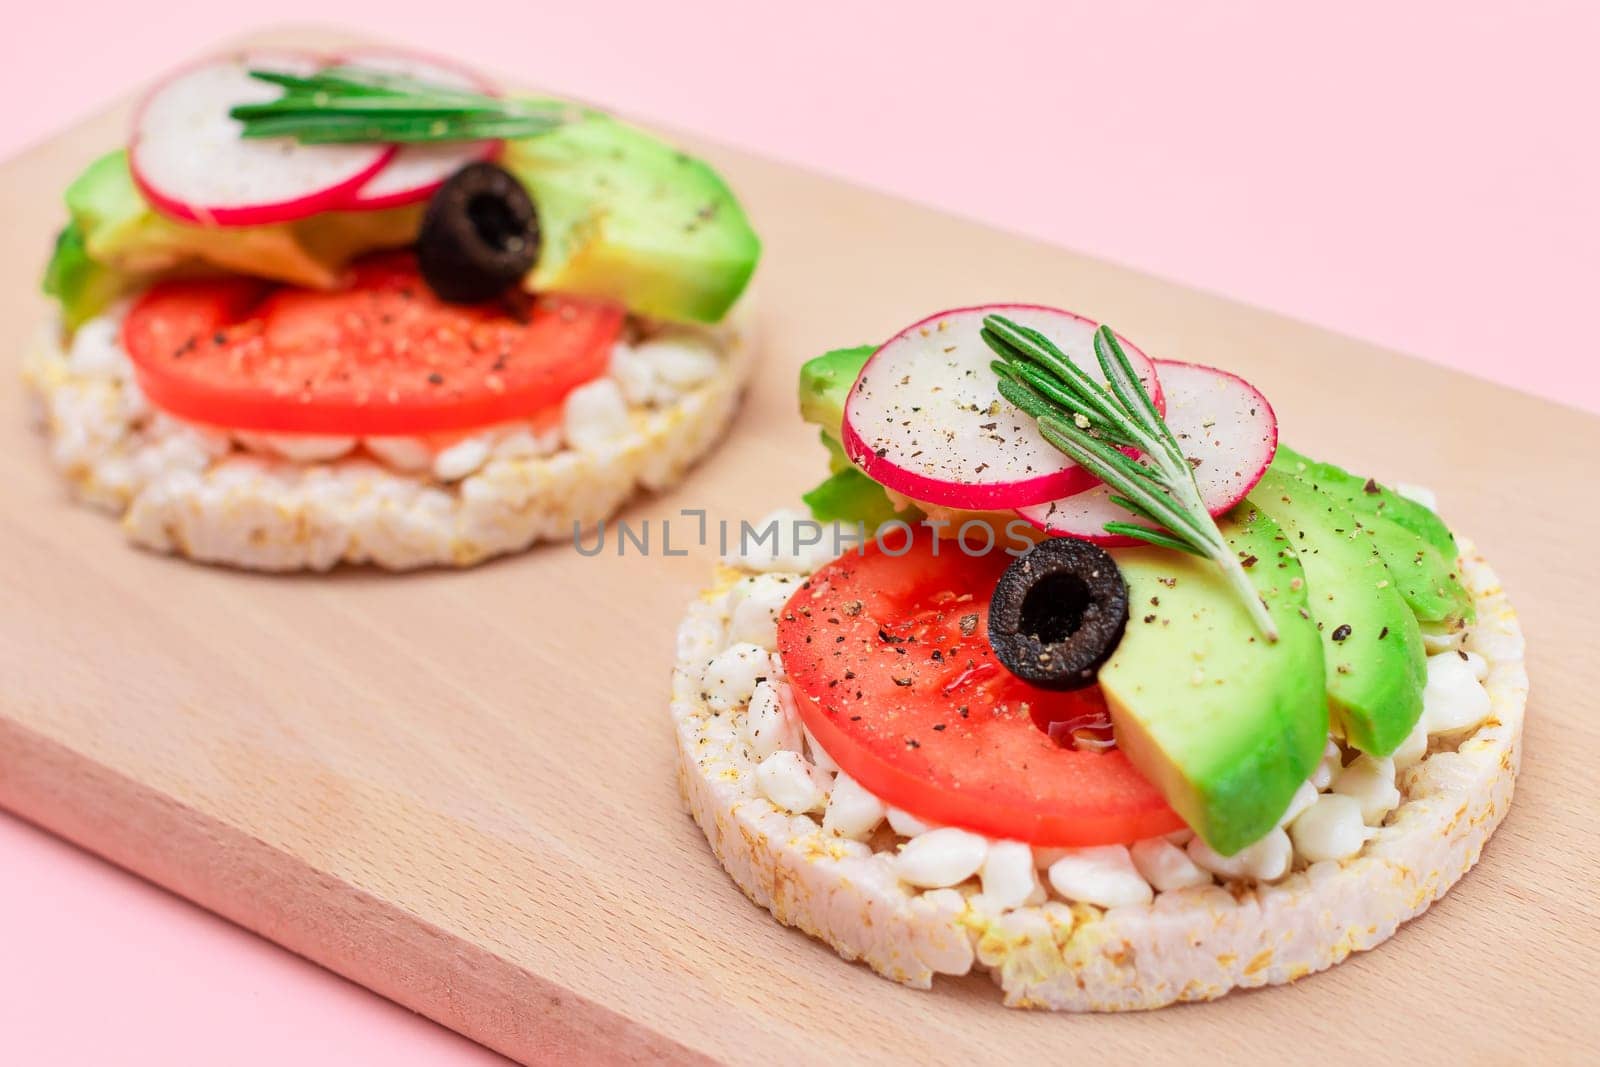 Rice Cake Sandwiches with Avocado, Tomato, Cottage Cheese, Olives and Radish on Wooden Cutting Board. Easy Breakfast. Diet Food. Quick and Healthy Sandwiches. Crispbread with Tasty Filling